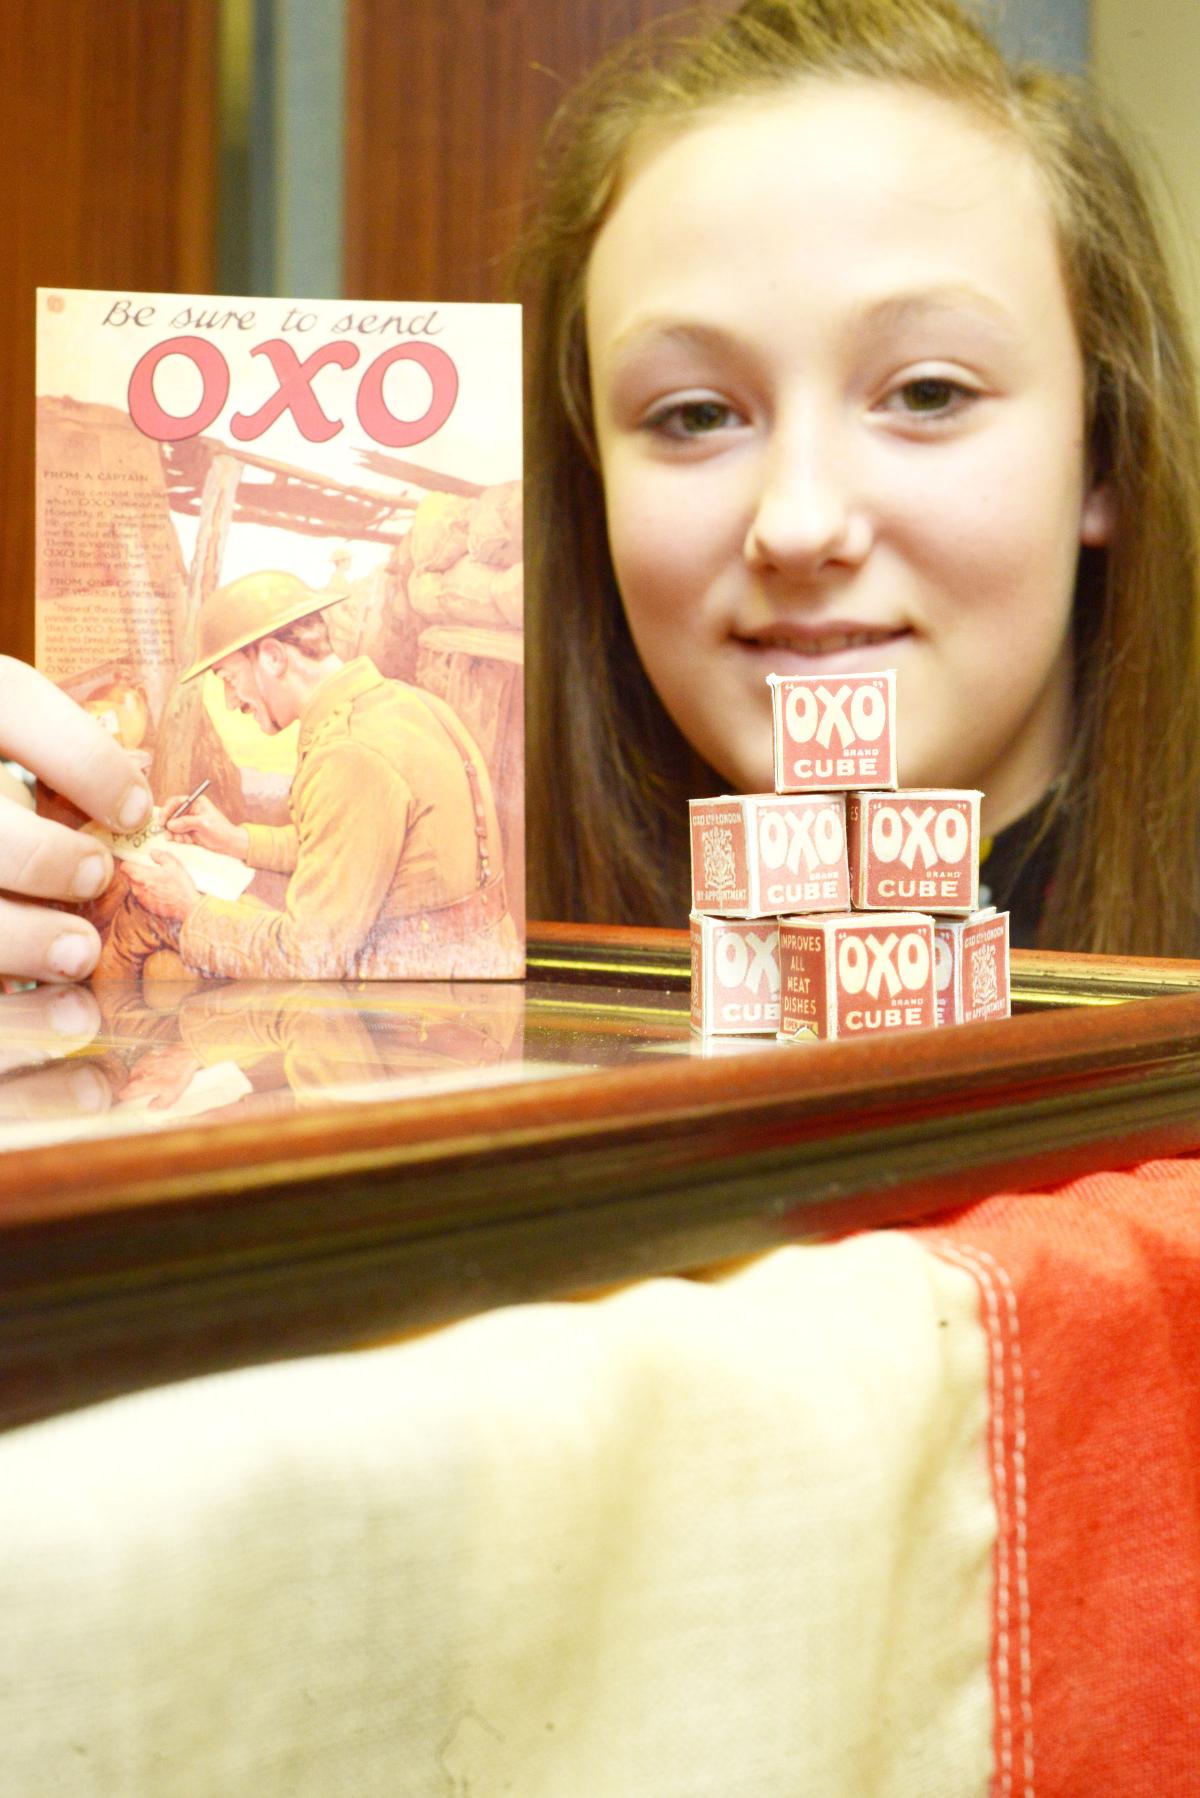 Pictured: Emily with the OXO cubes.
